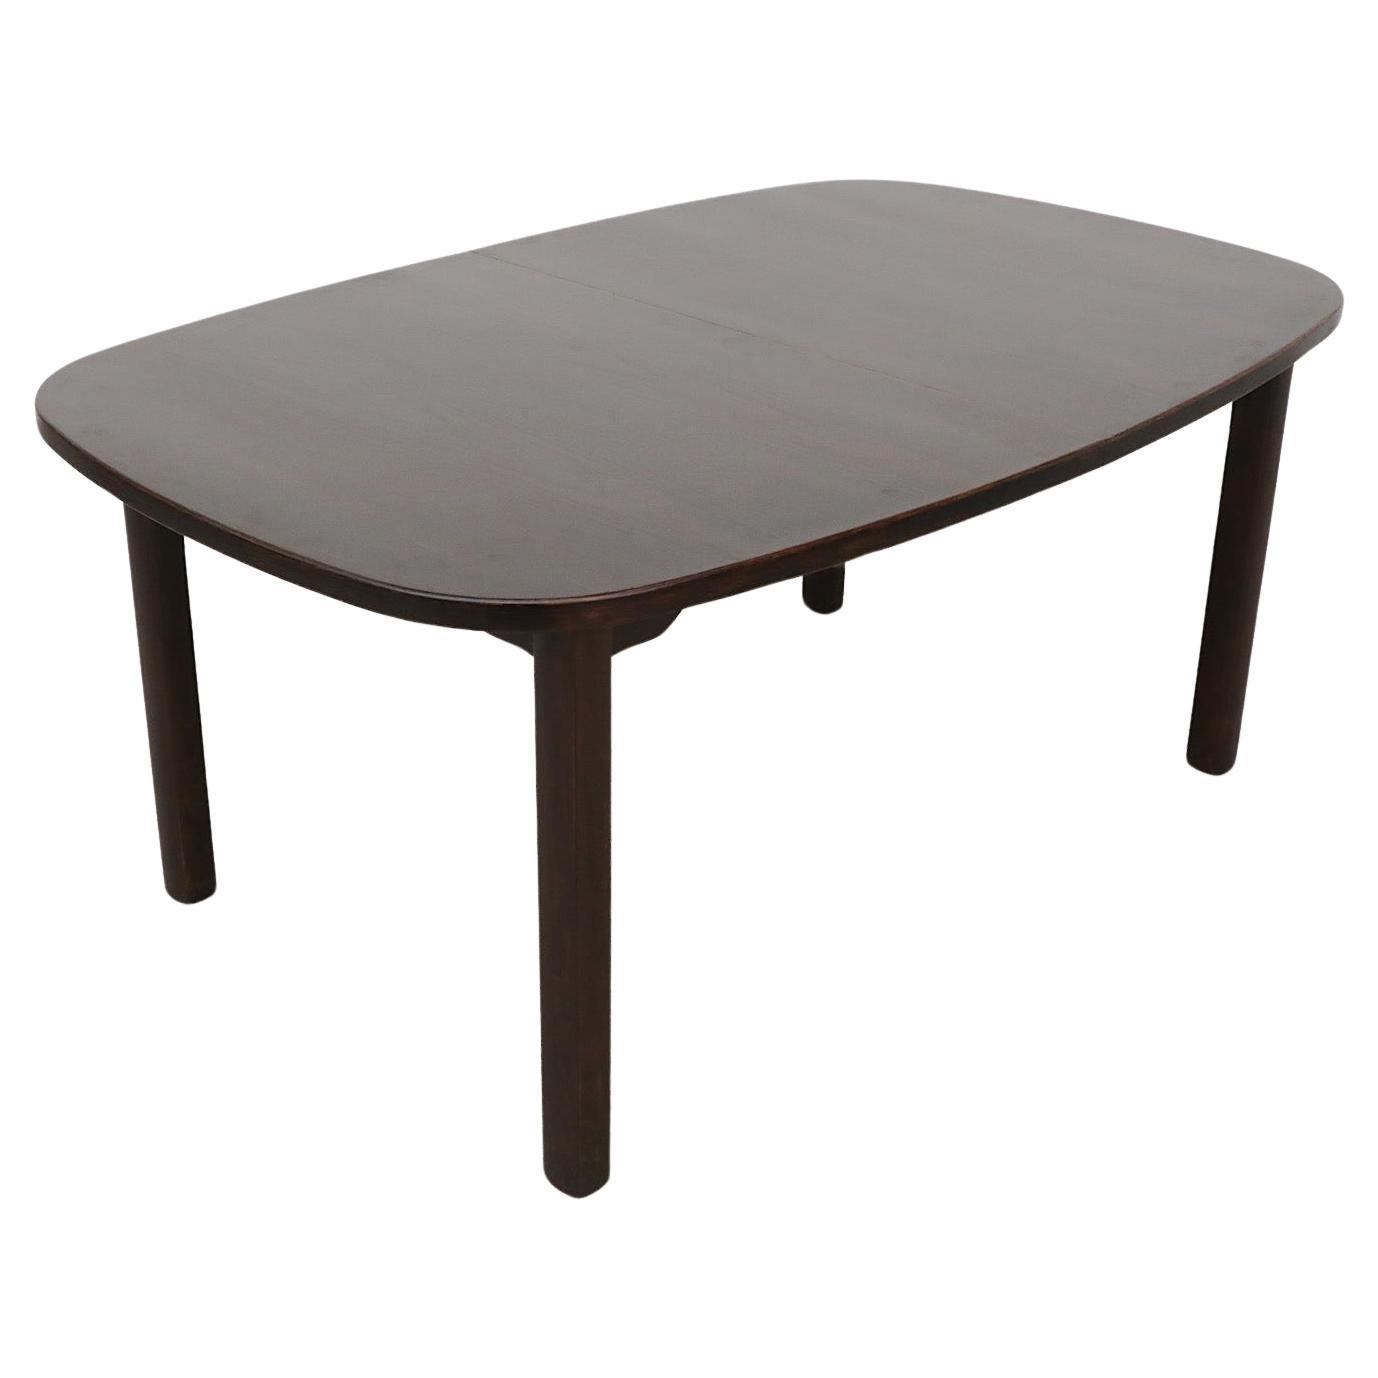 Dyrlund Oval Dark Stained Dining Table with 2 Extension Leaves